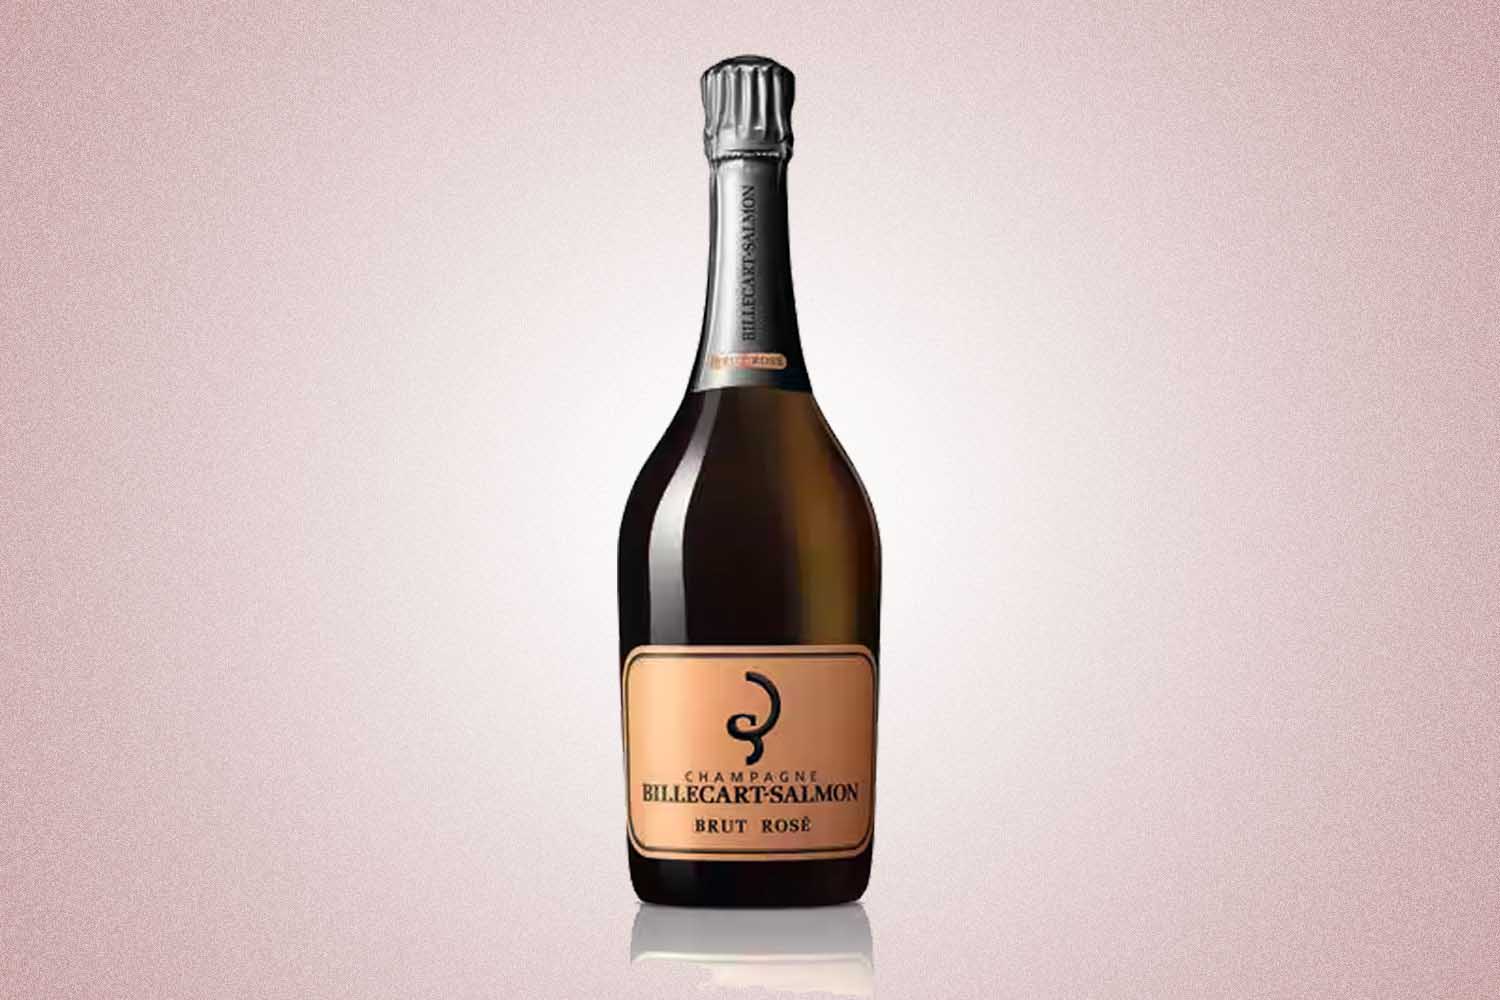 A bottle of Billecart-Salmon Brut Rose with grey foil at the top and a rose gold colored label, a perfect Valentine’s Day gift for 2022, on a pink background.